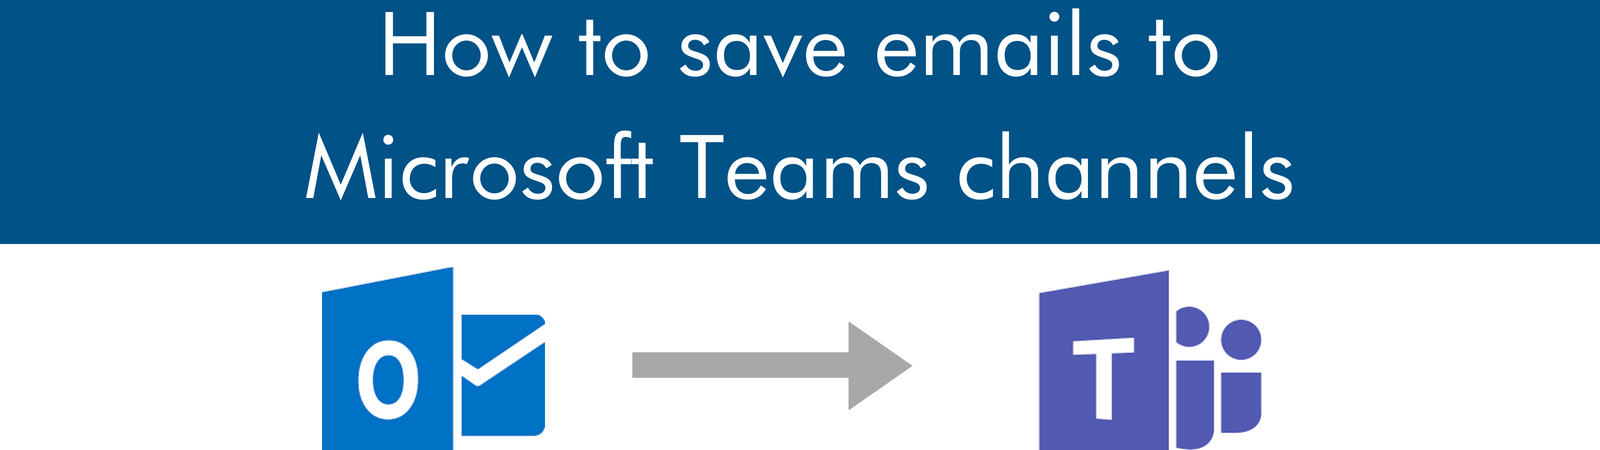 How to save emails to Microsoft Teams channels